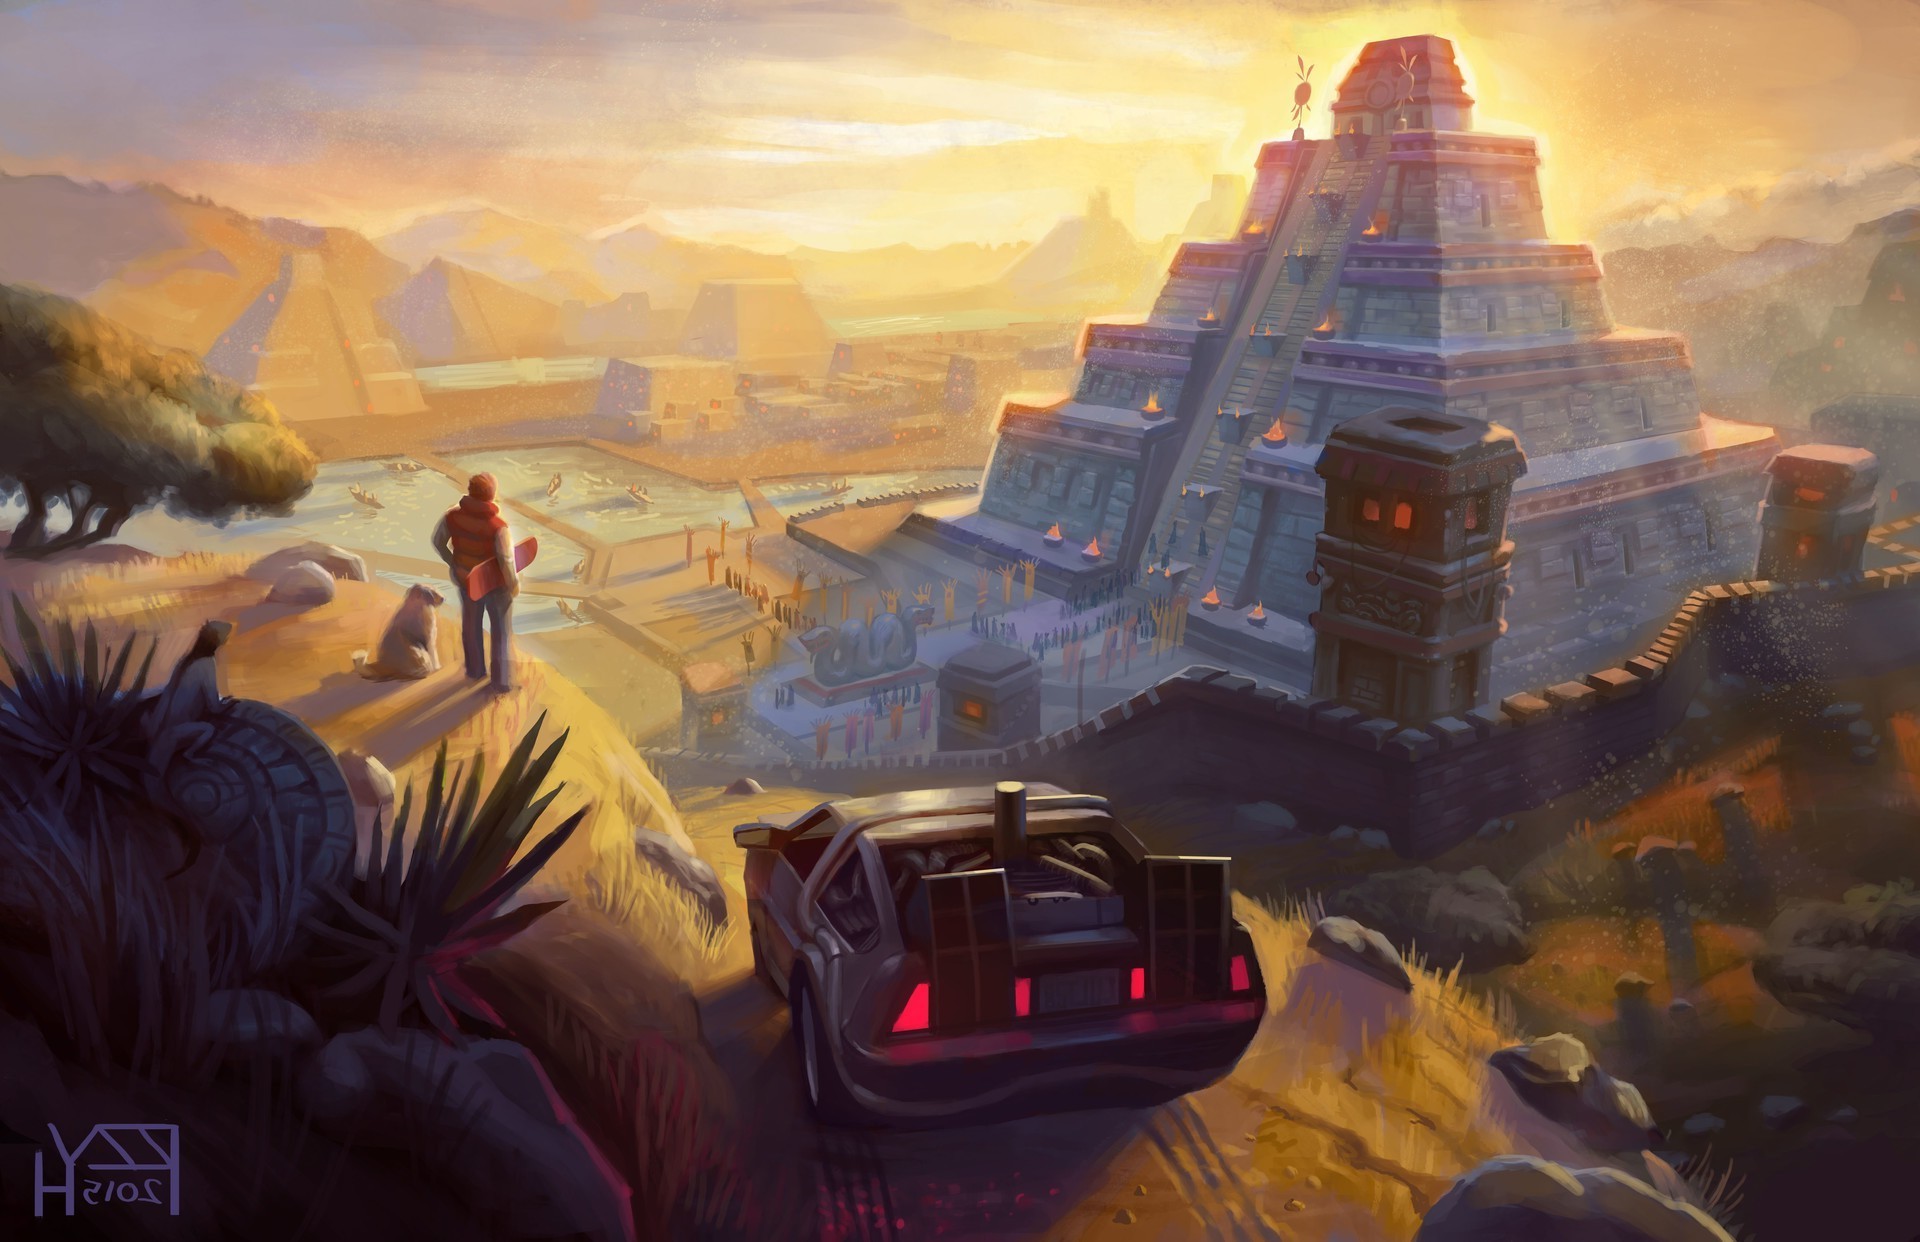 Artwork, Fantasy Art, Back To The Future, DeLorean, Pyramid, Movies, Mayan, Aztec Wallpapers HD / Desktop and Mobile Backgrounds